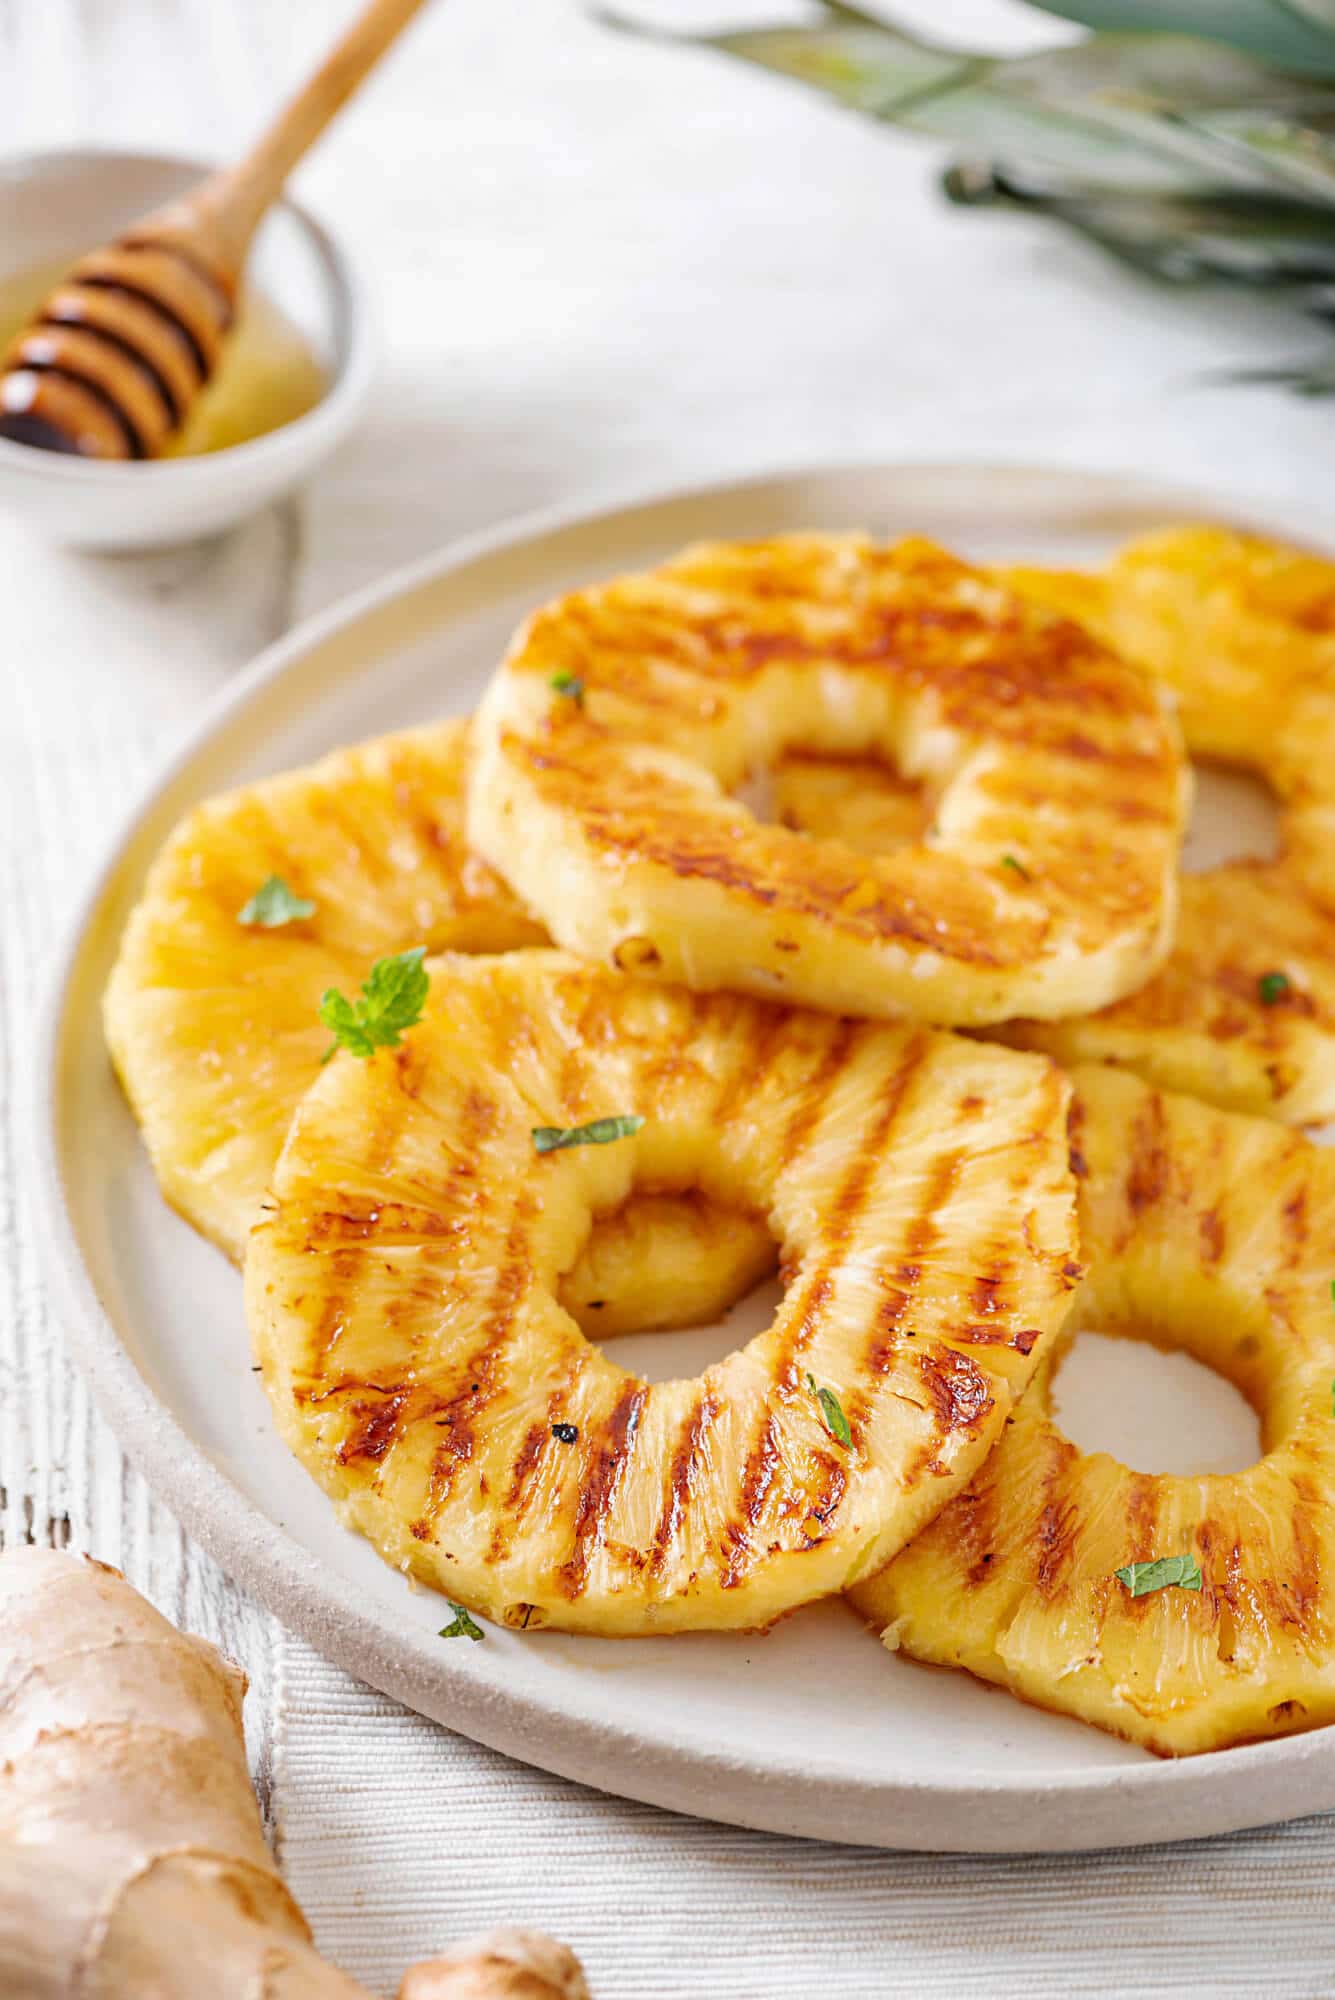 pineapple-slices-on-a-white-plate-with-a-bowl-of-honey-with-a-honey-dipper